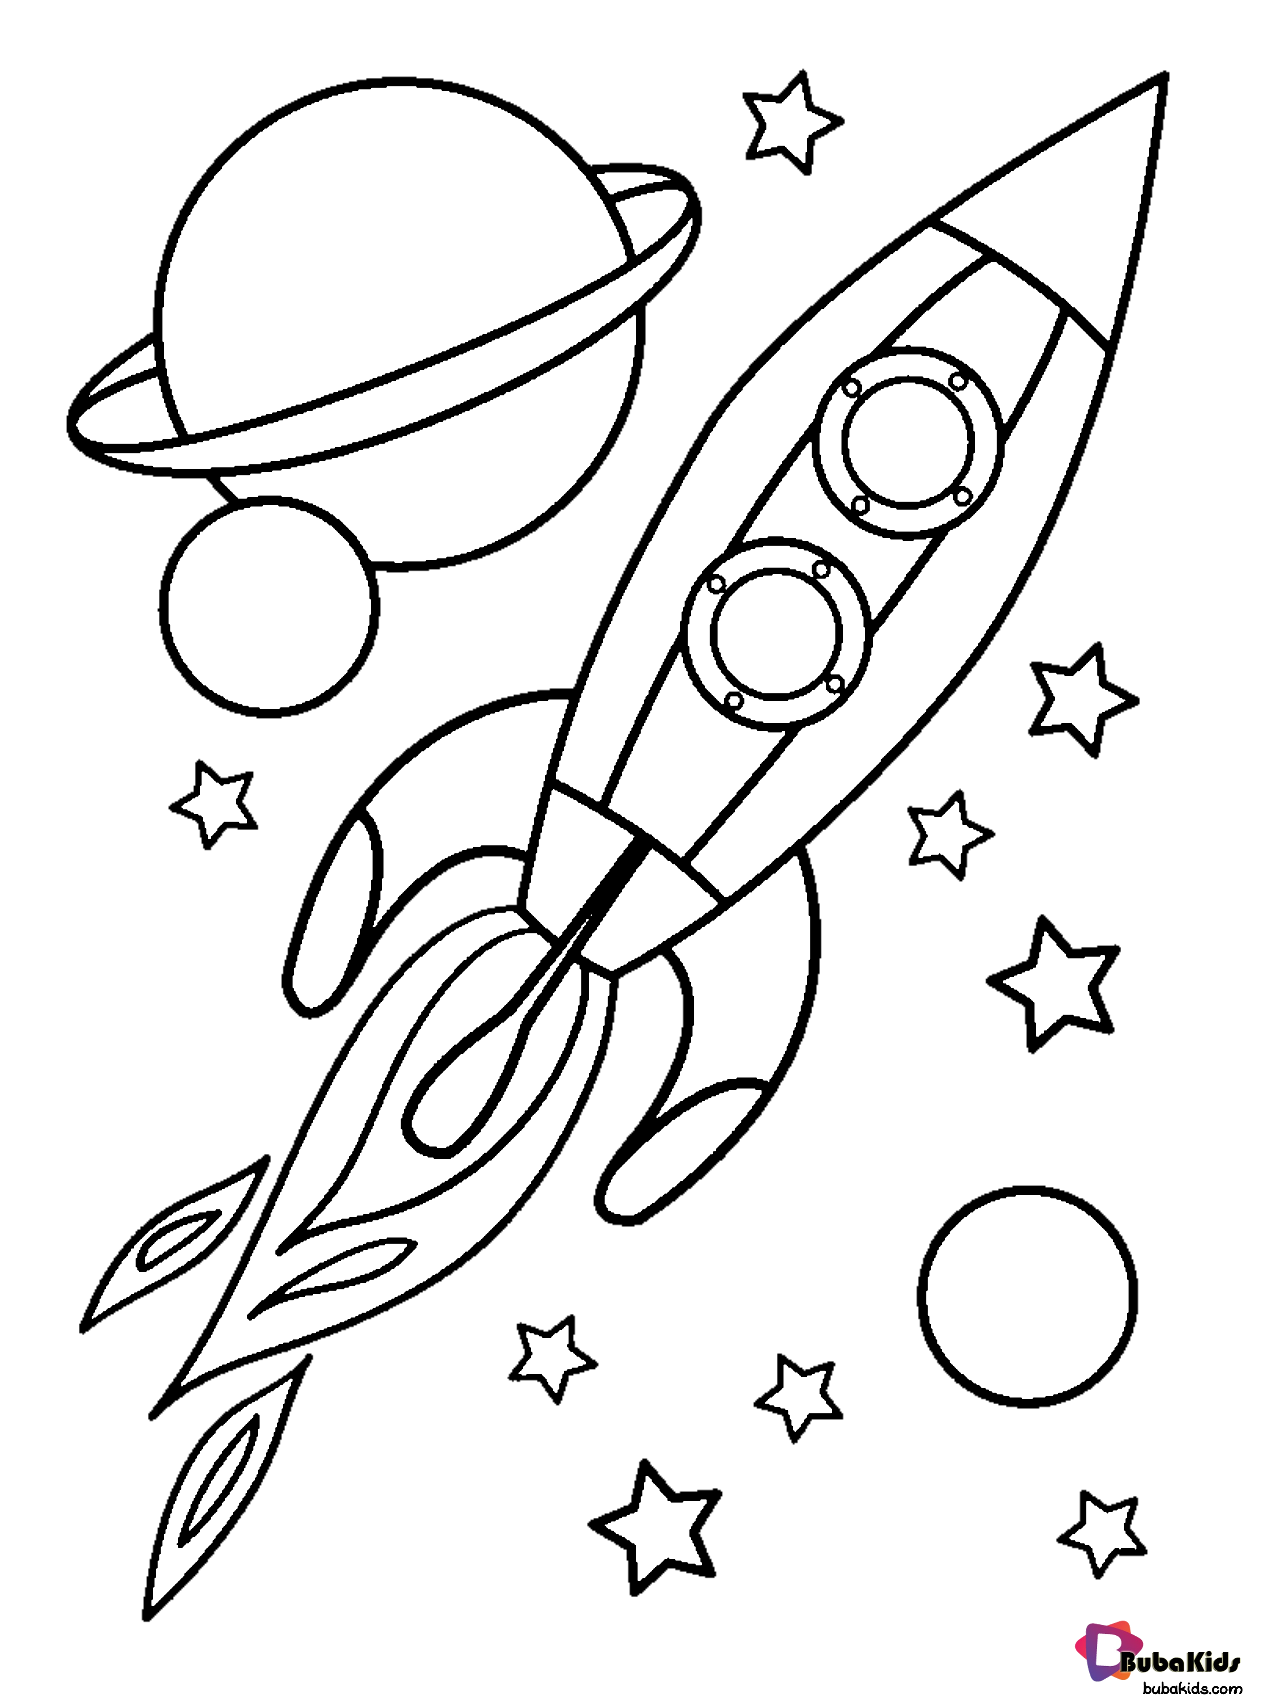 stars and rocket in outer space coloring page